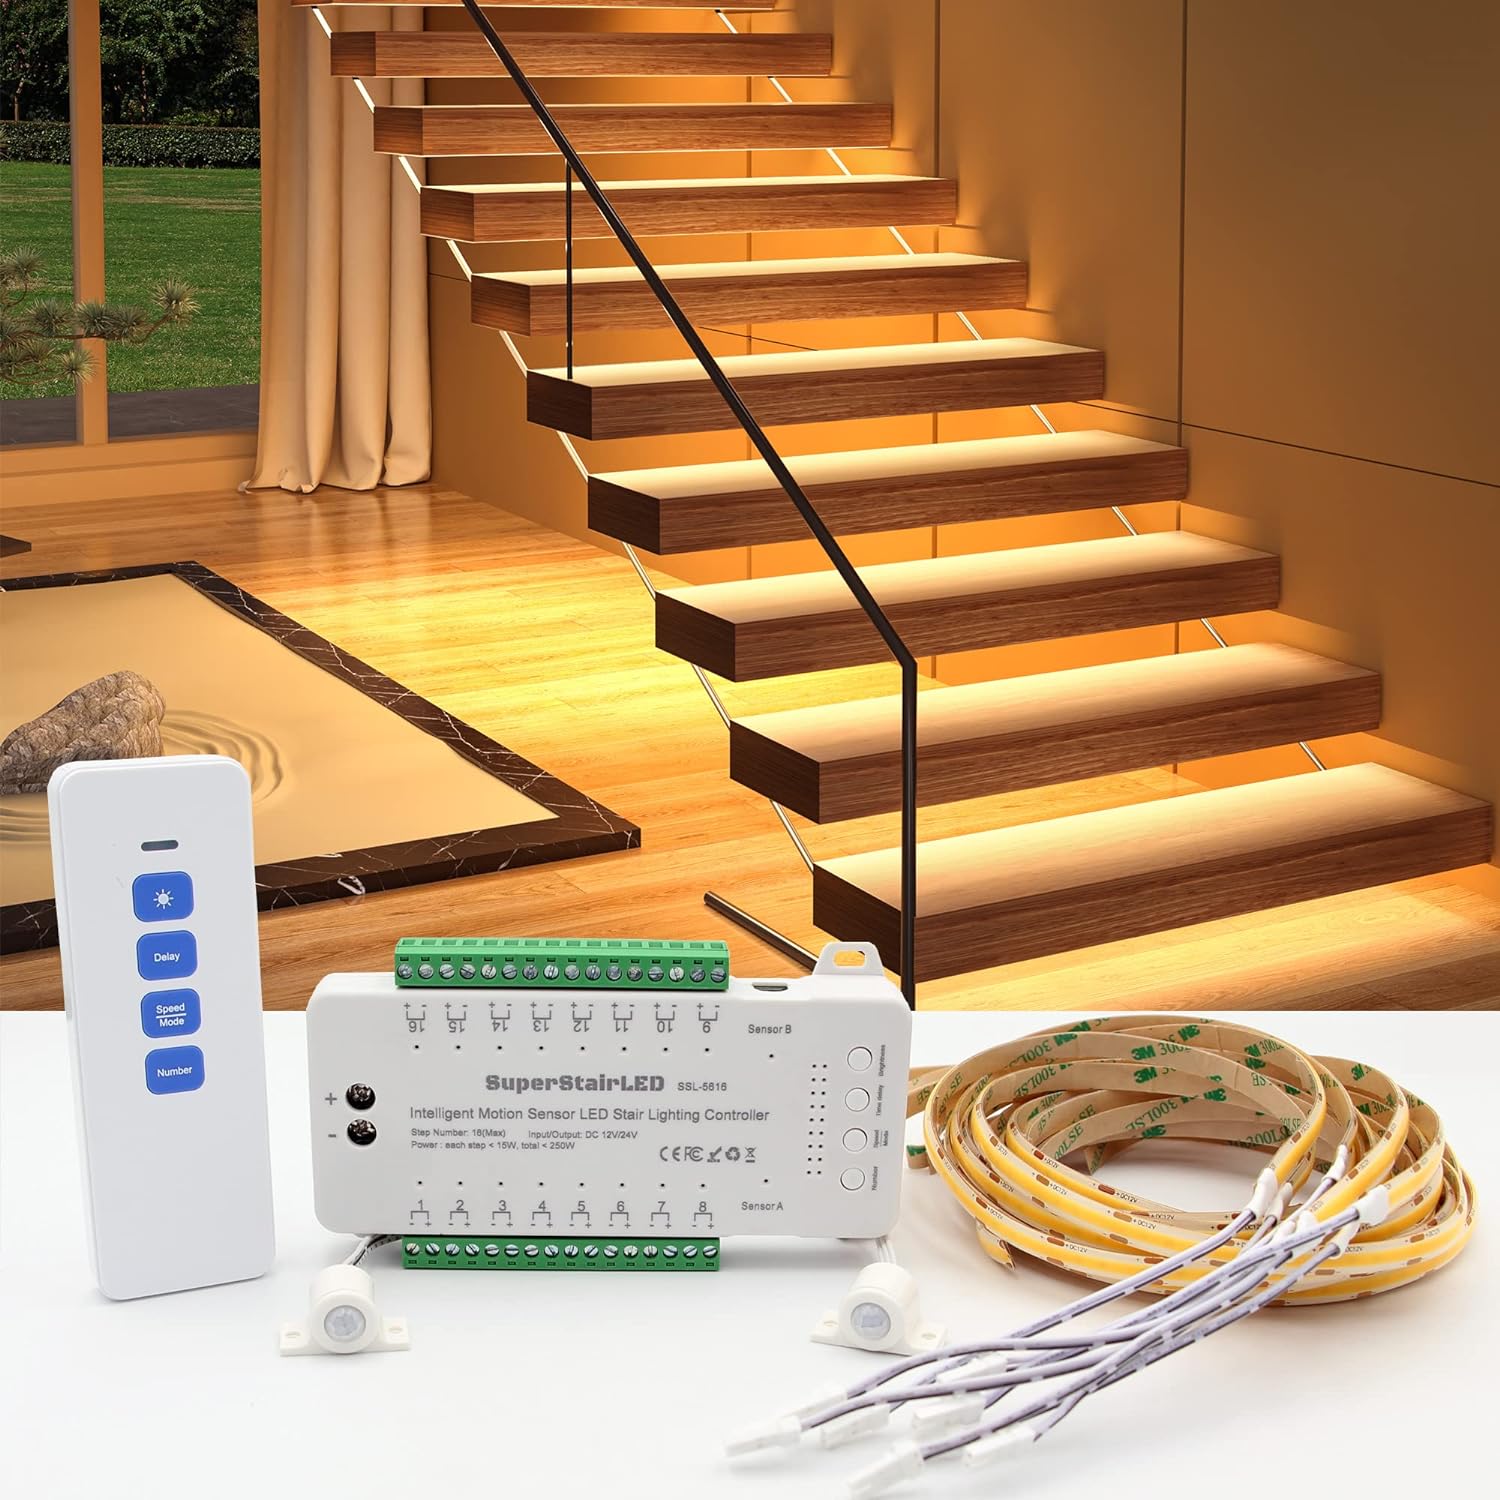 SuperStairLED Intelligent Motion Sensor LED Stair Lighting Complete Set SSL-5616, 40 Inches Long Cuttable LED Strip Light for Indoor LED Stair Lights LED Step Lights (16 Stairs, Warm White 3000K)